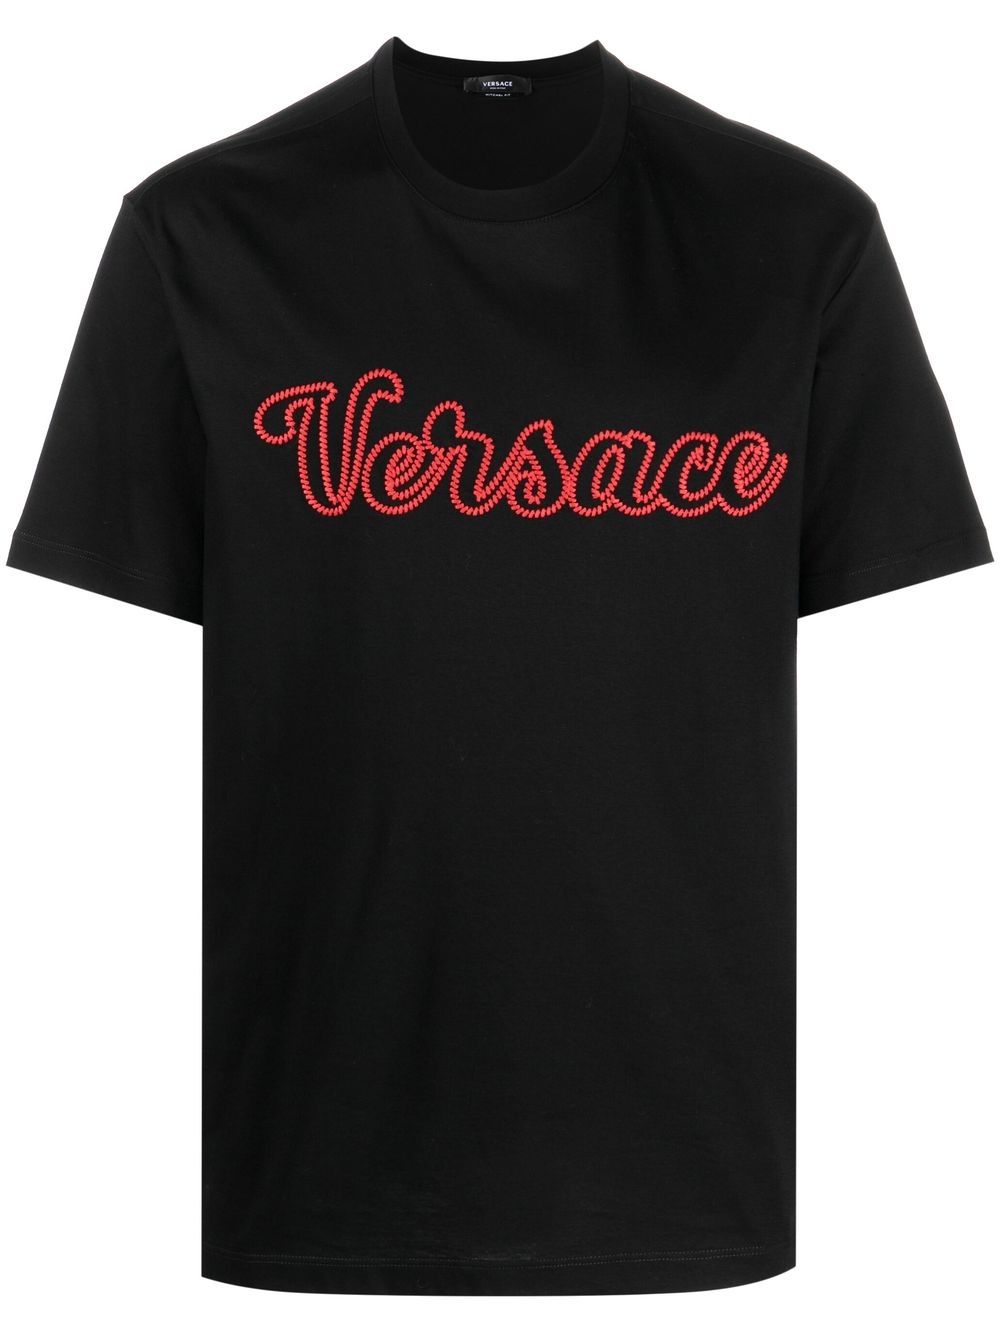 Versace embroidered logo T-shirt - Black